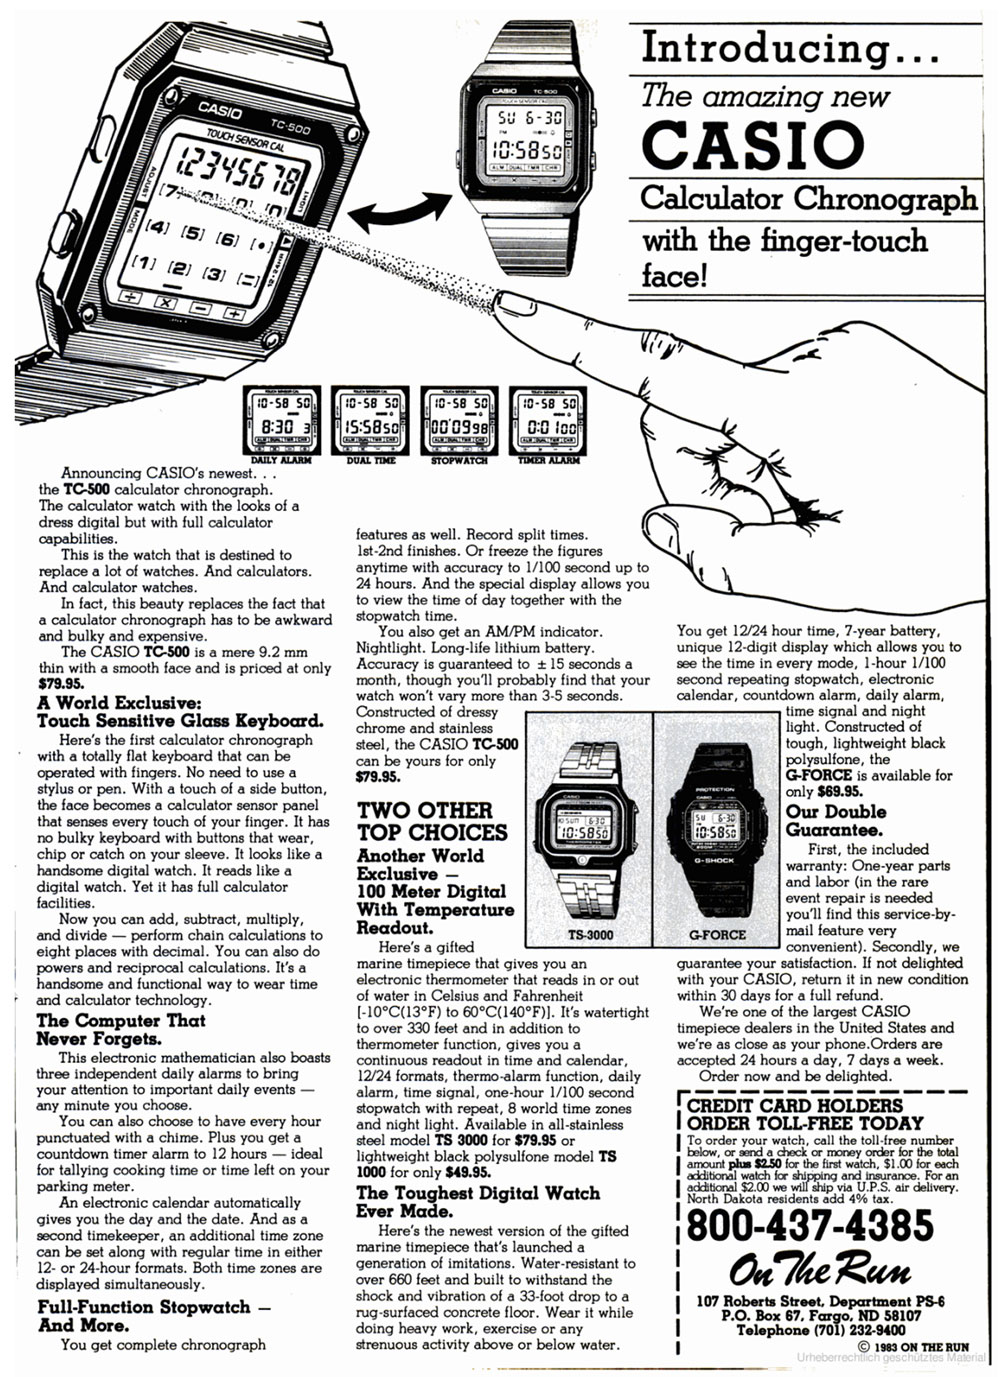 Casio DW-5000 advertisement. Click for full version.